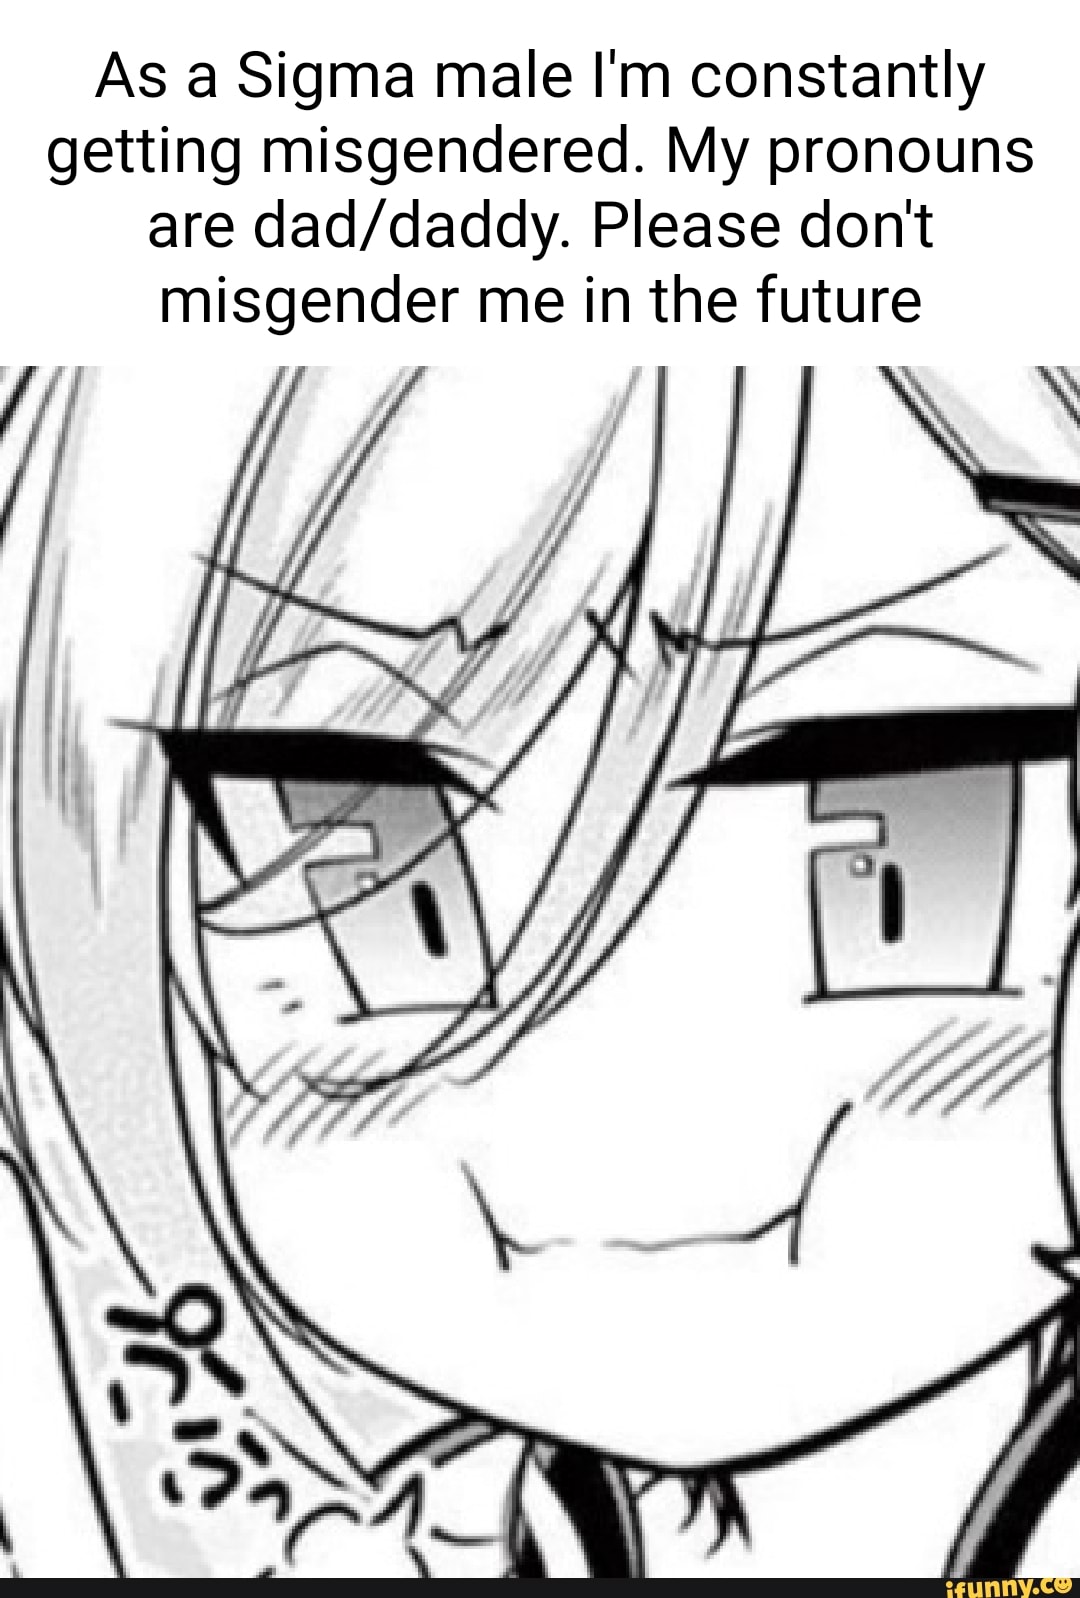 As a Sigma male I'm constantly getting misgendered. My pronouns are ...